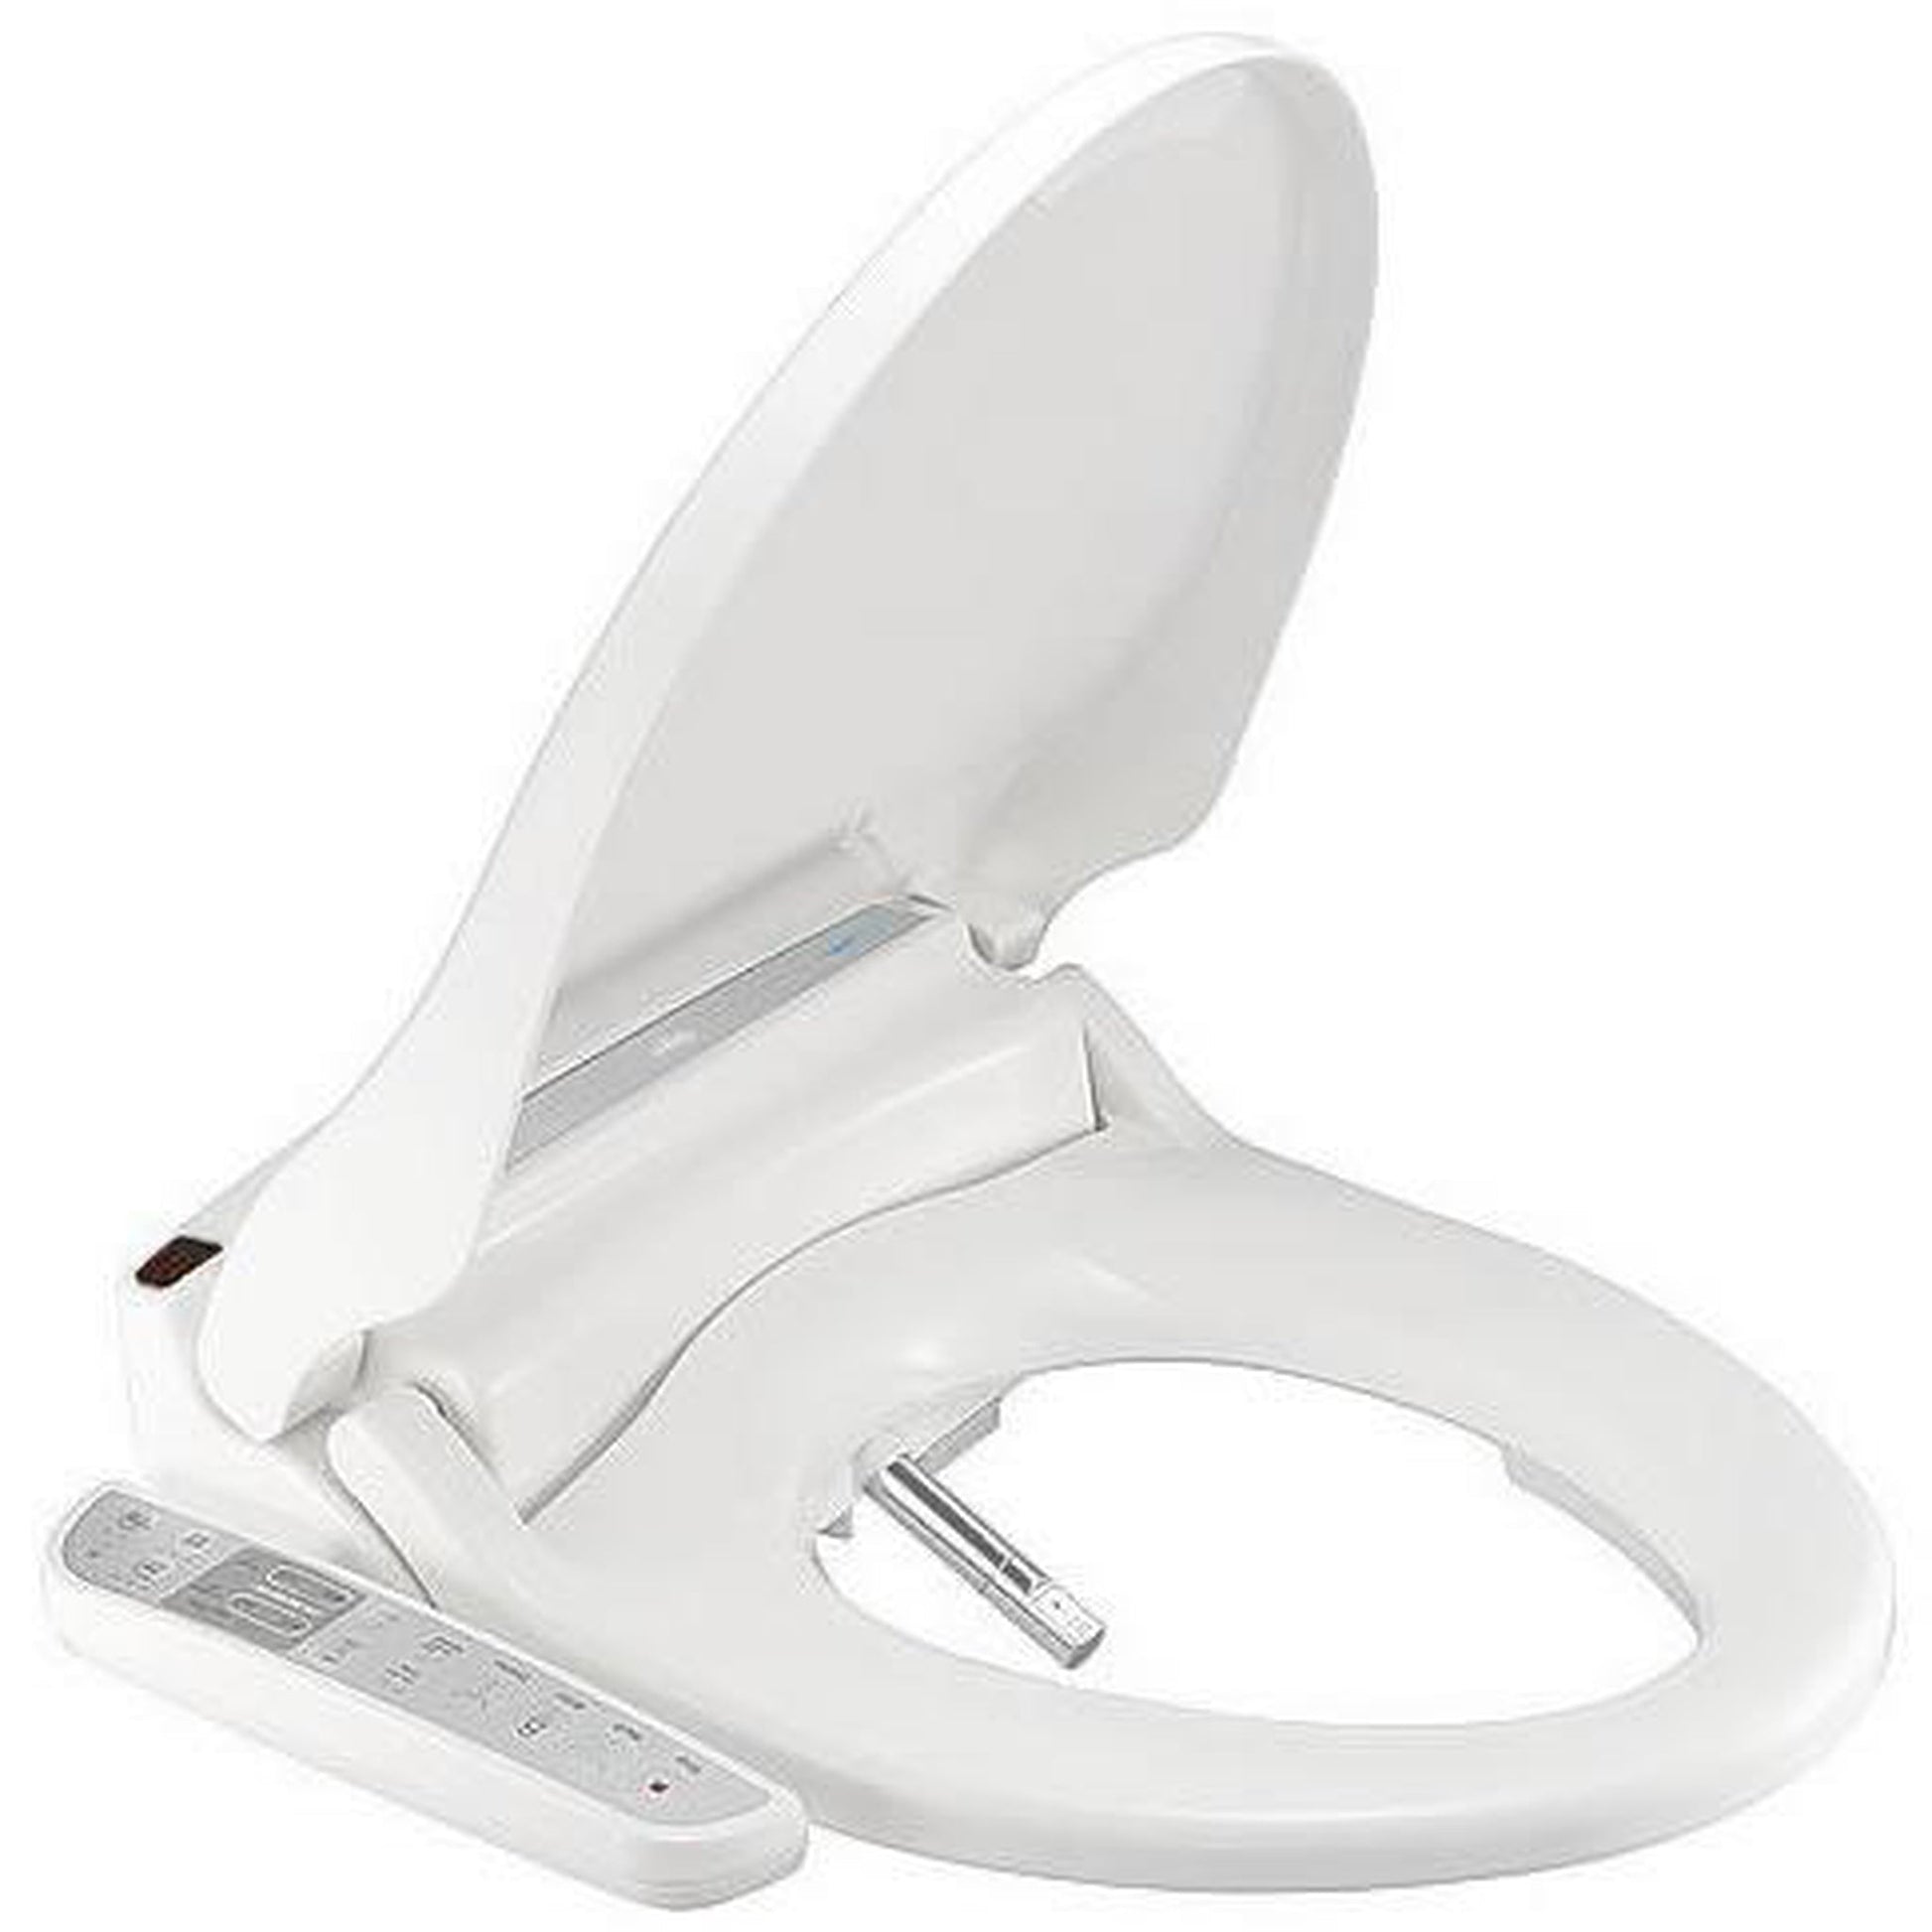 CleanSense DIB-1500-RW White Advanced Round Bidet Seat With Side Panel Control and Energy Efficient Water Heating System